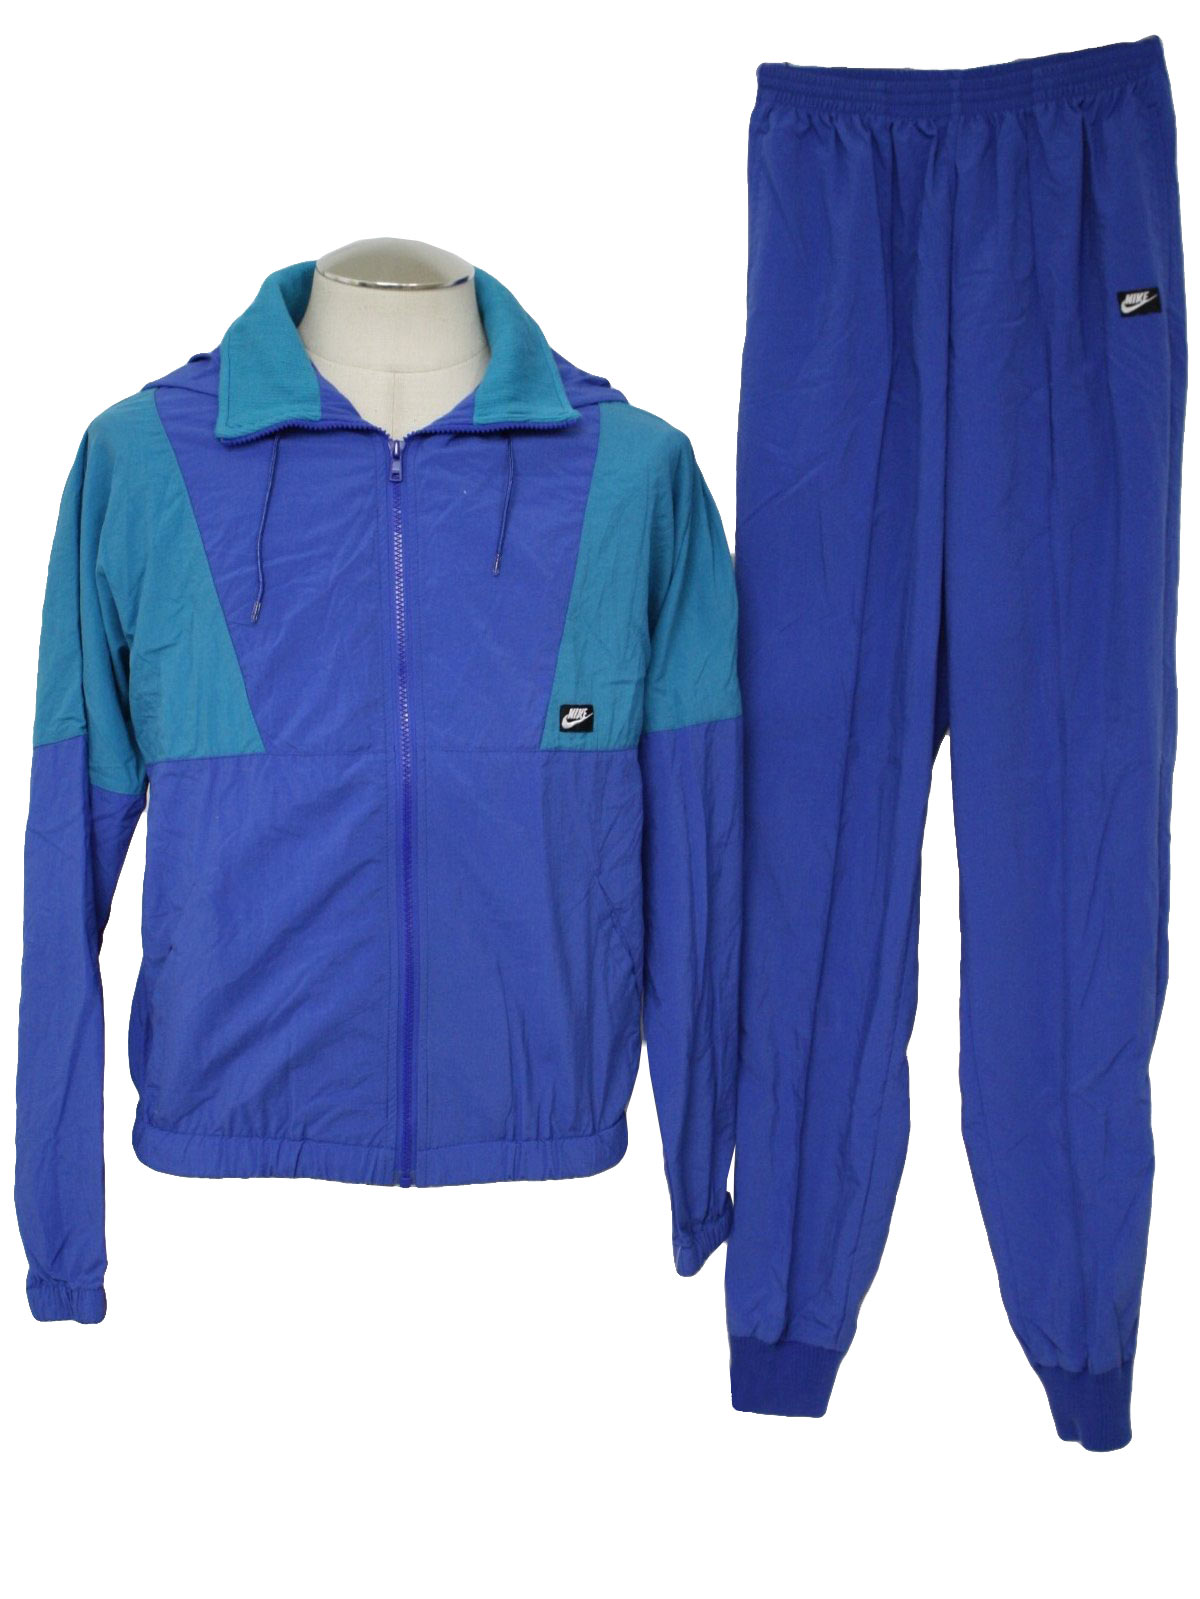 Nike 80's Vintage Suit: late 80s -Nike- Mens two piece nylon totally ...